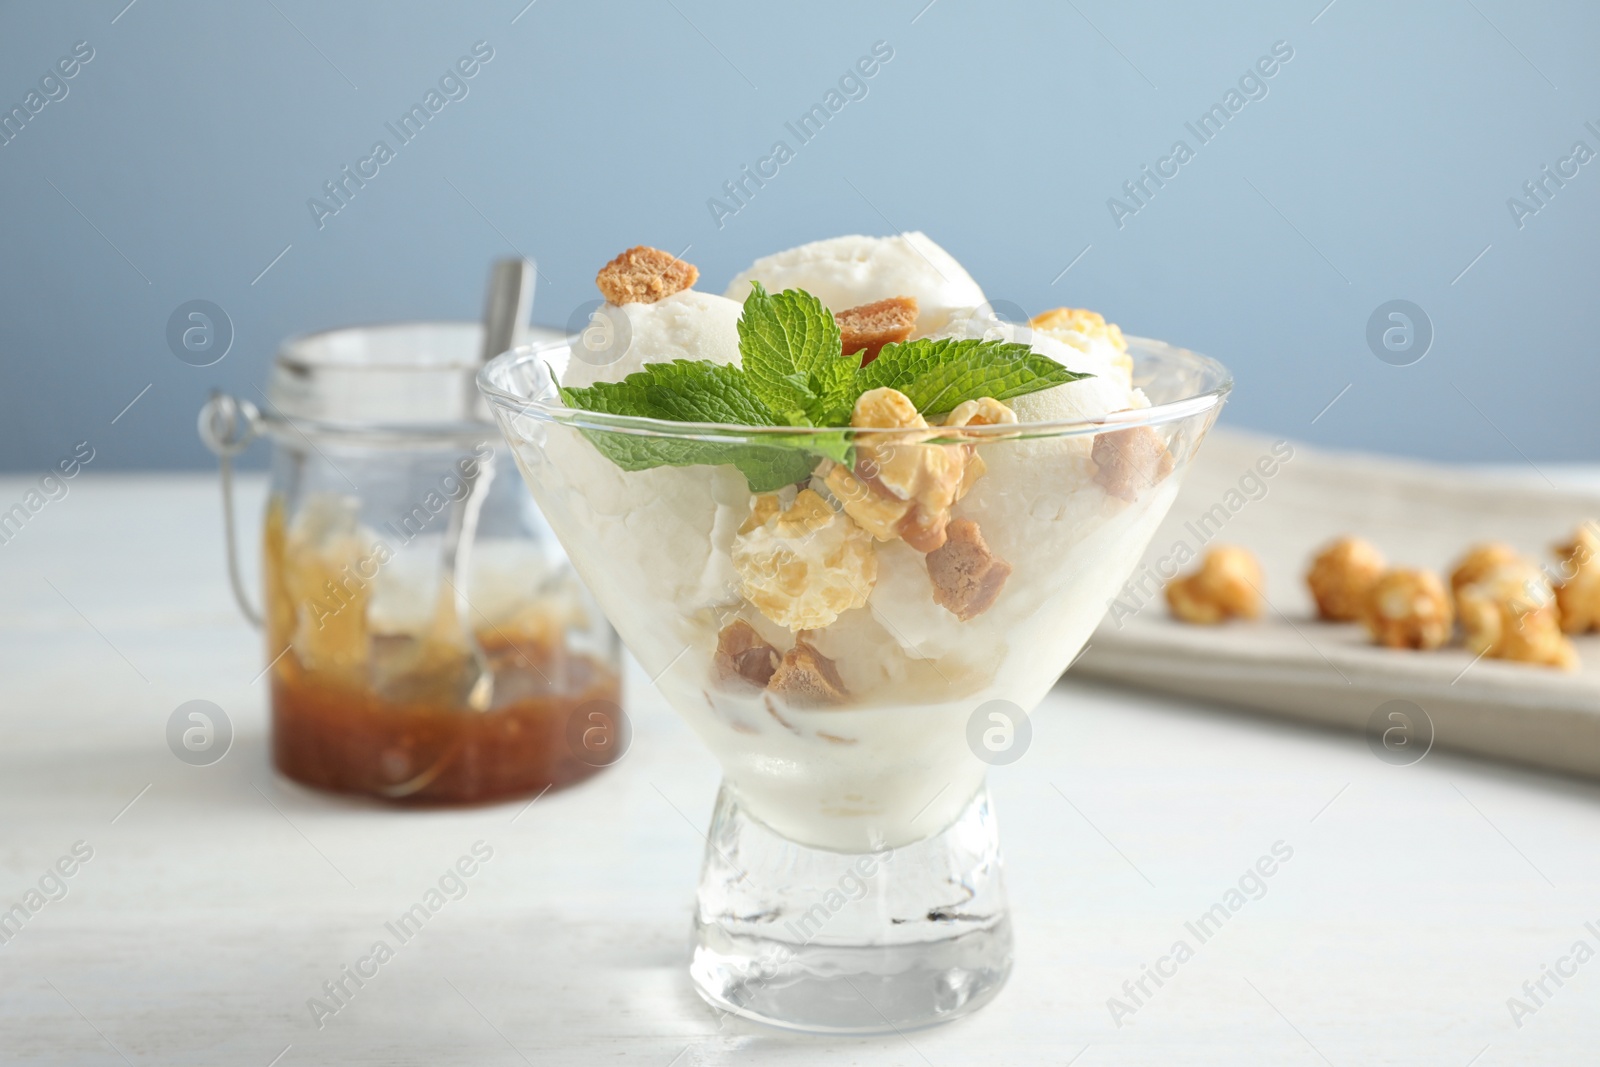 Photo of Delicious ice cream with caramel candies and popcorn in dessert bowl on white wooden table